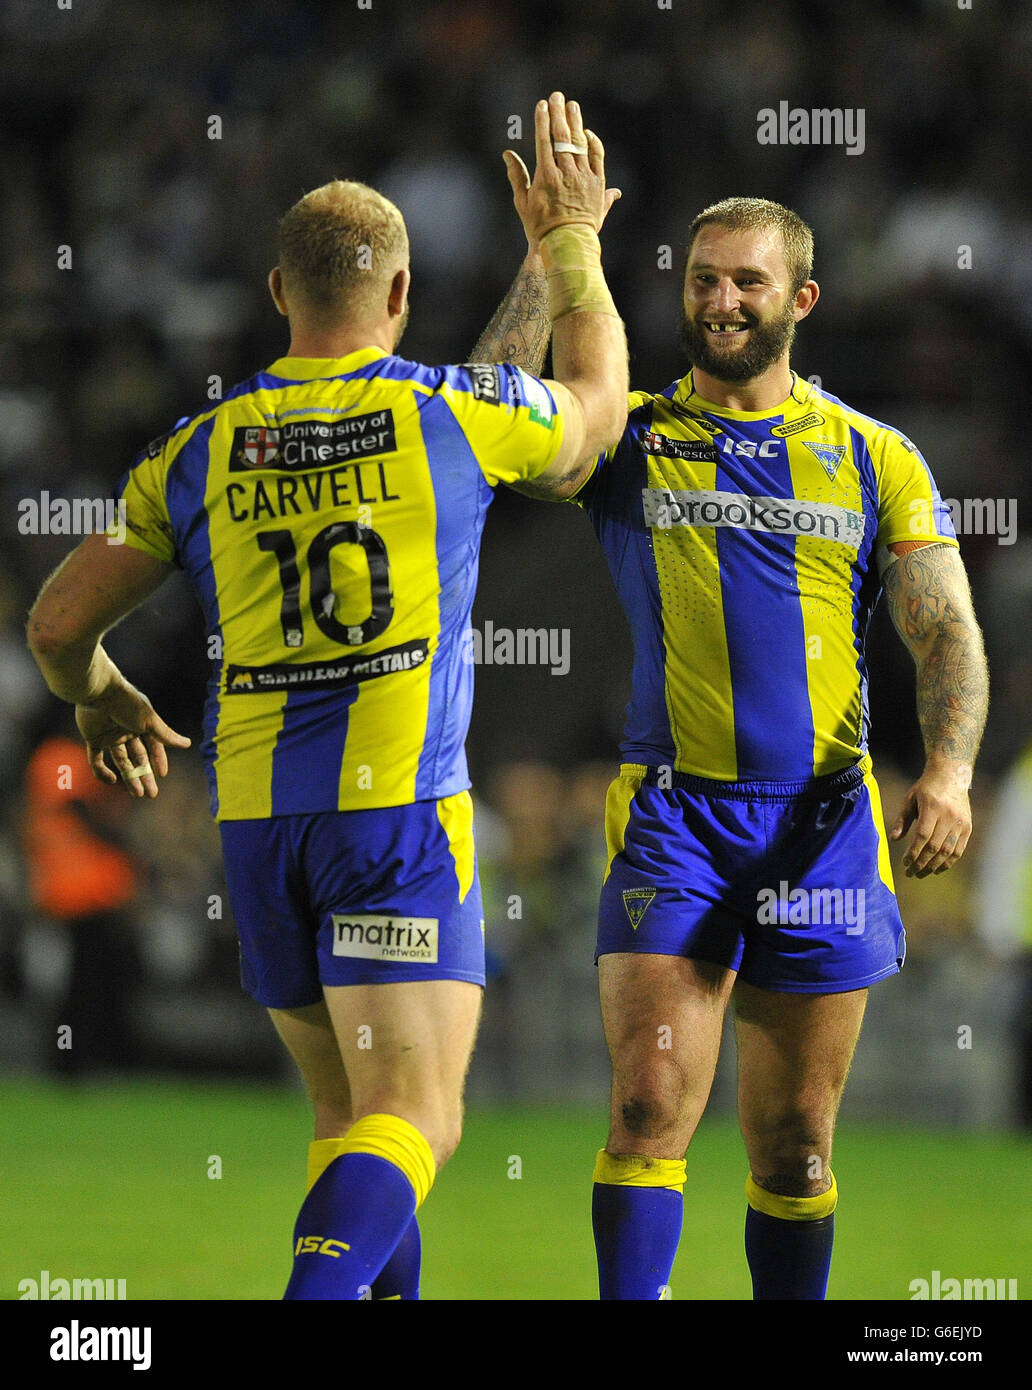 Warrington Wolves' Garreth Carvell and Paul Wood celebrate victory during the Super League Semi-Final match at The Halliwell Jones Stadium, Warrington. Stock Photo